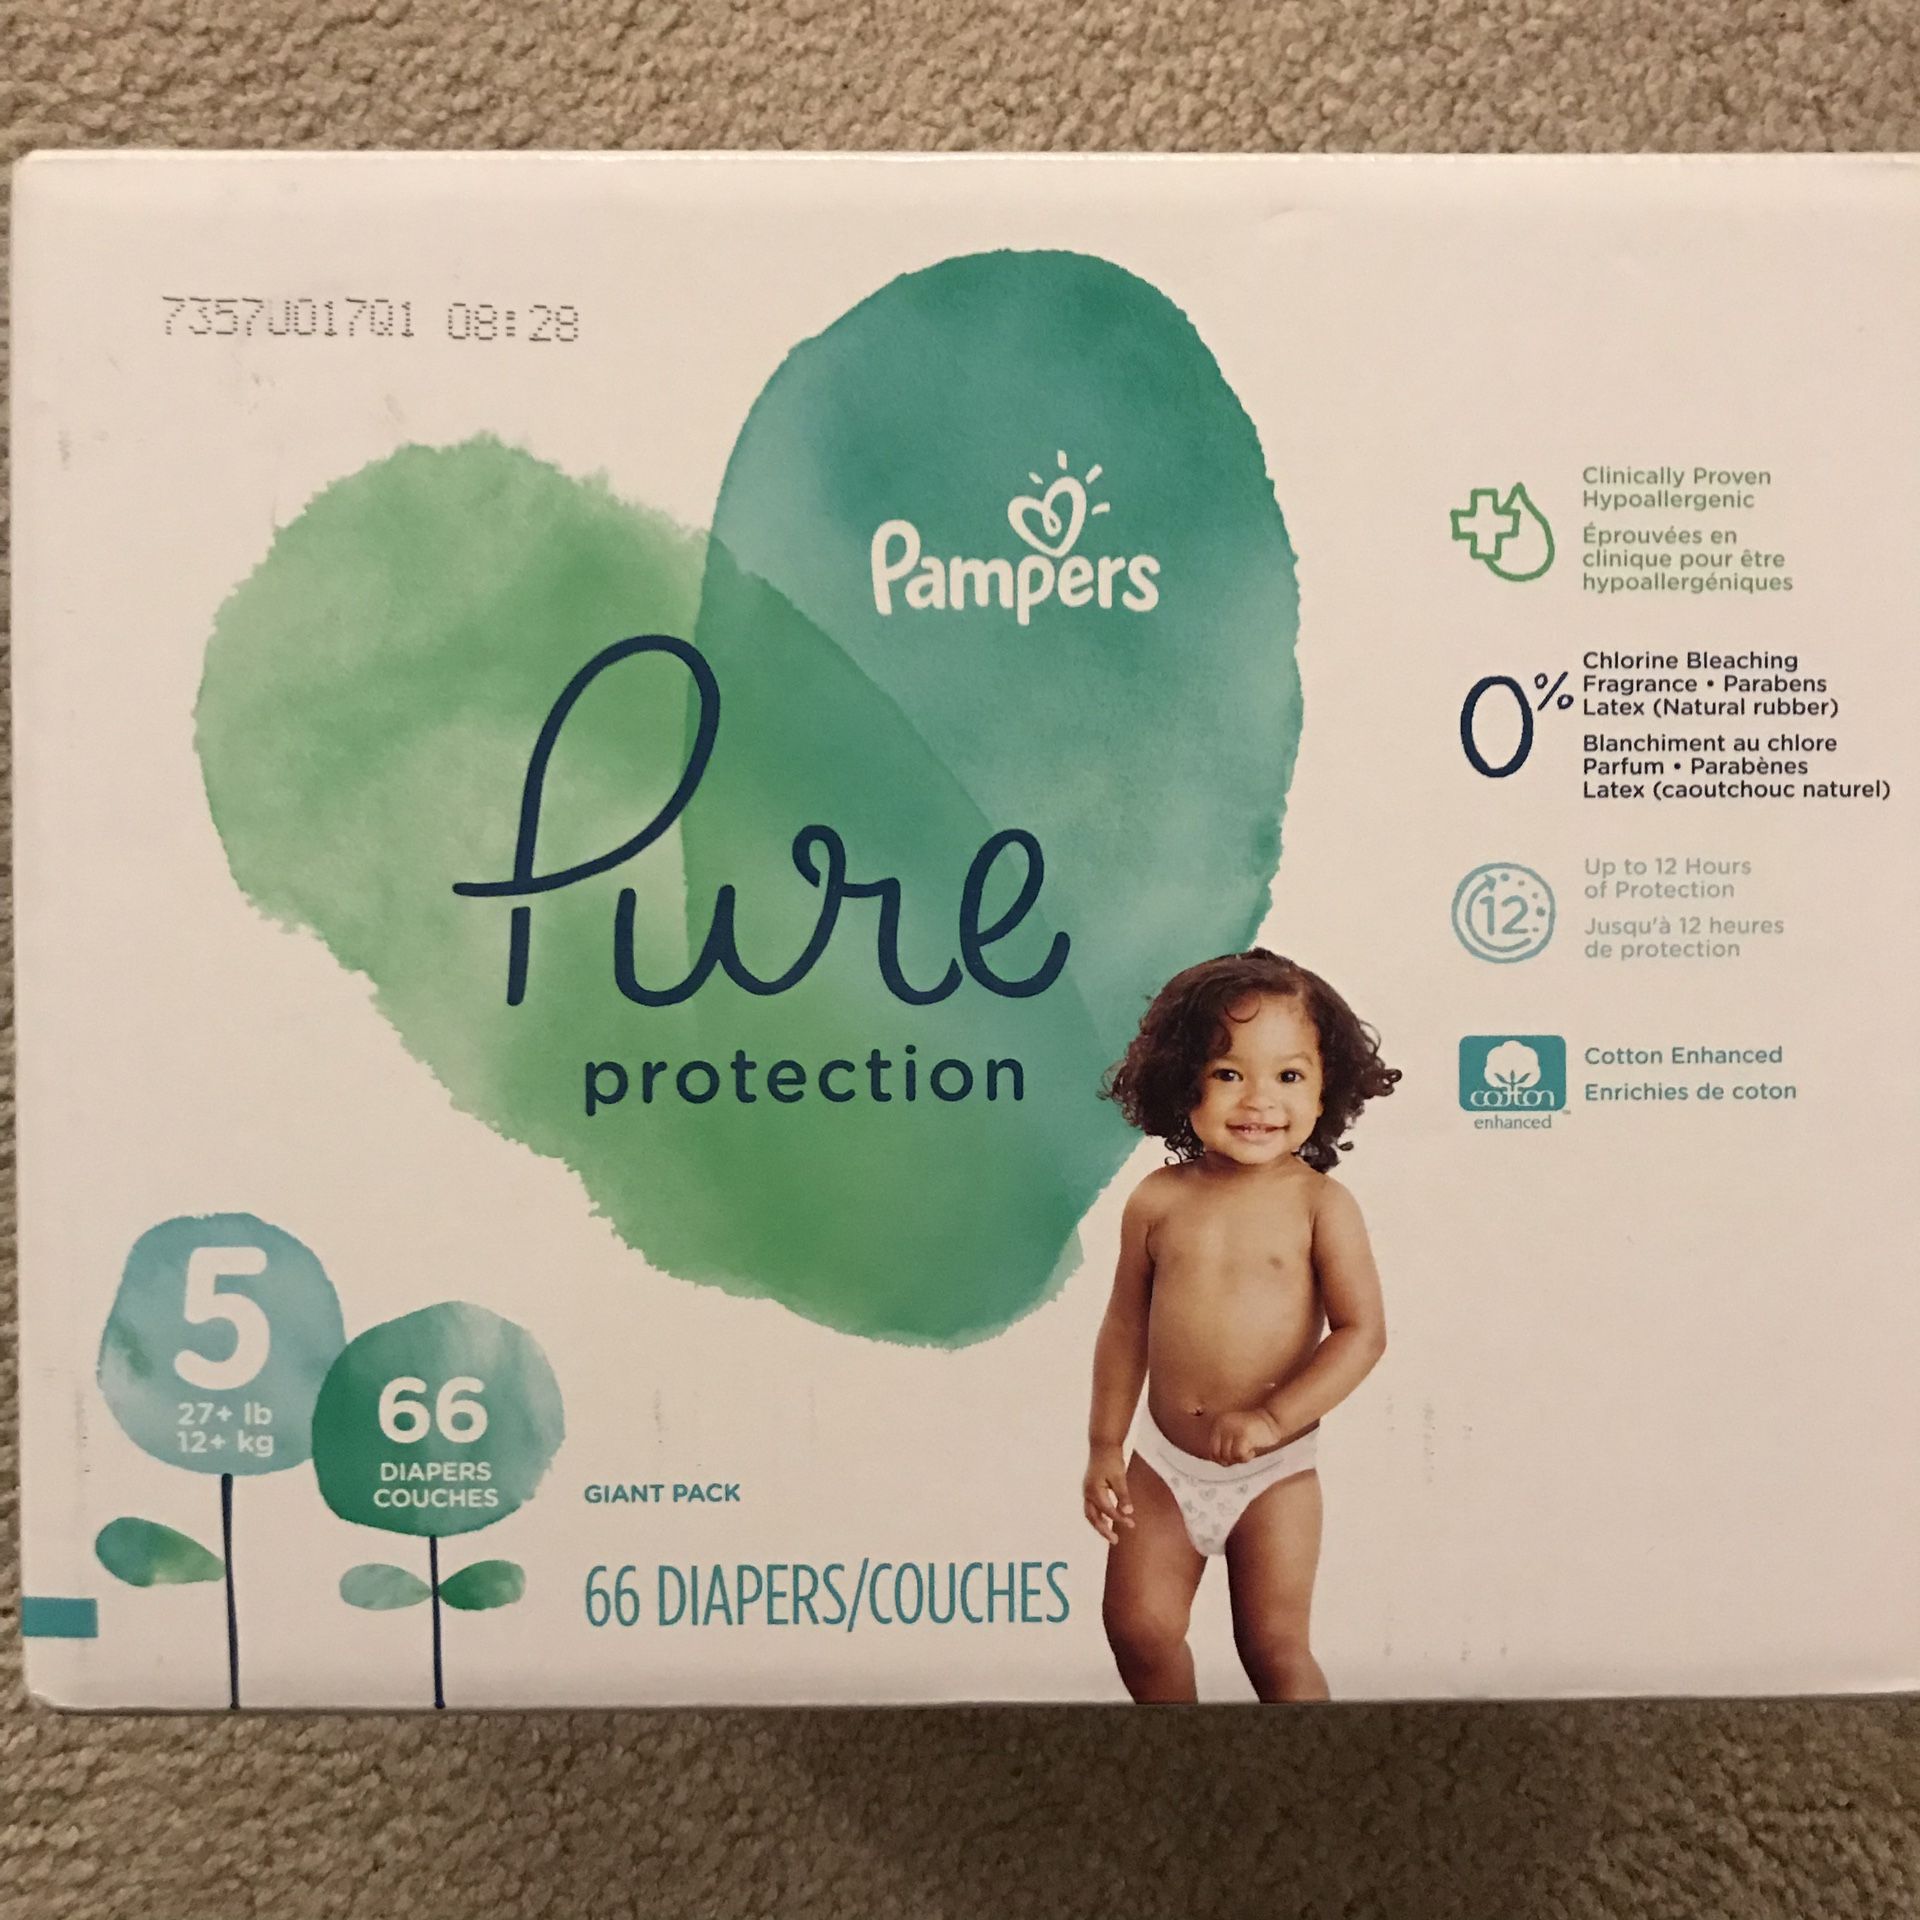 Pampers Pure Protection Diapers, 66 count. Size 5.